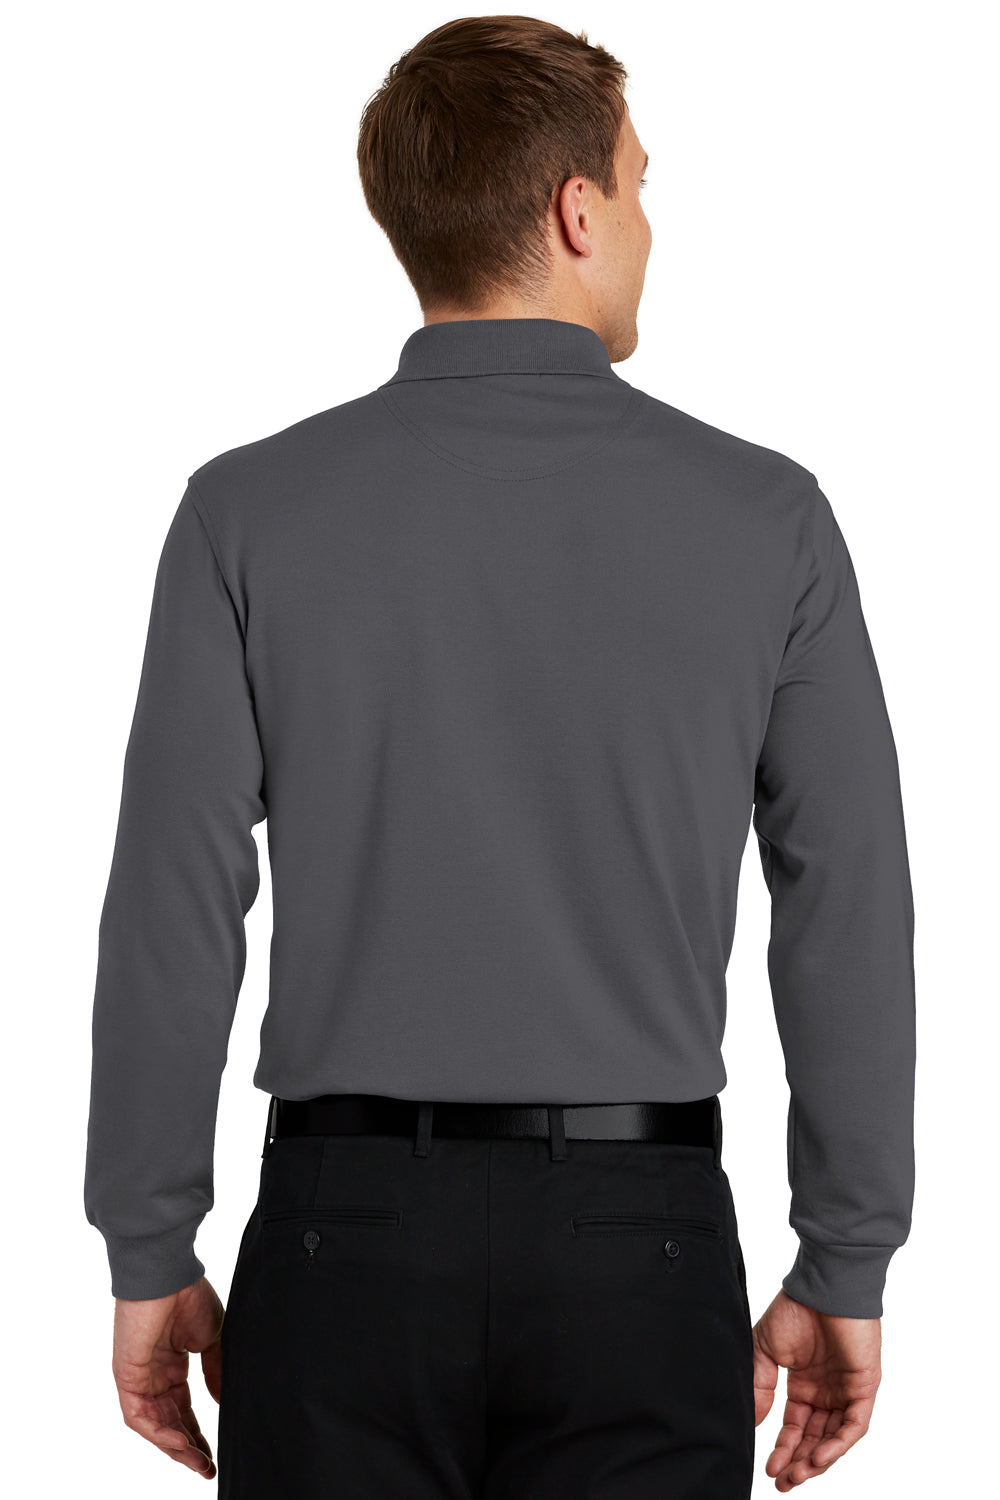 Port Authority K455LS Mens Rapid Dry Moisture Wicking Long Sleeve Polo Shirt Charcoal Grey Back